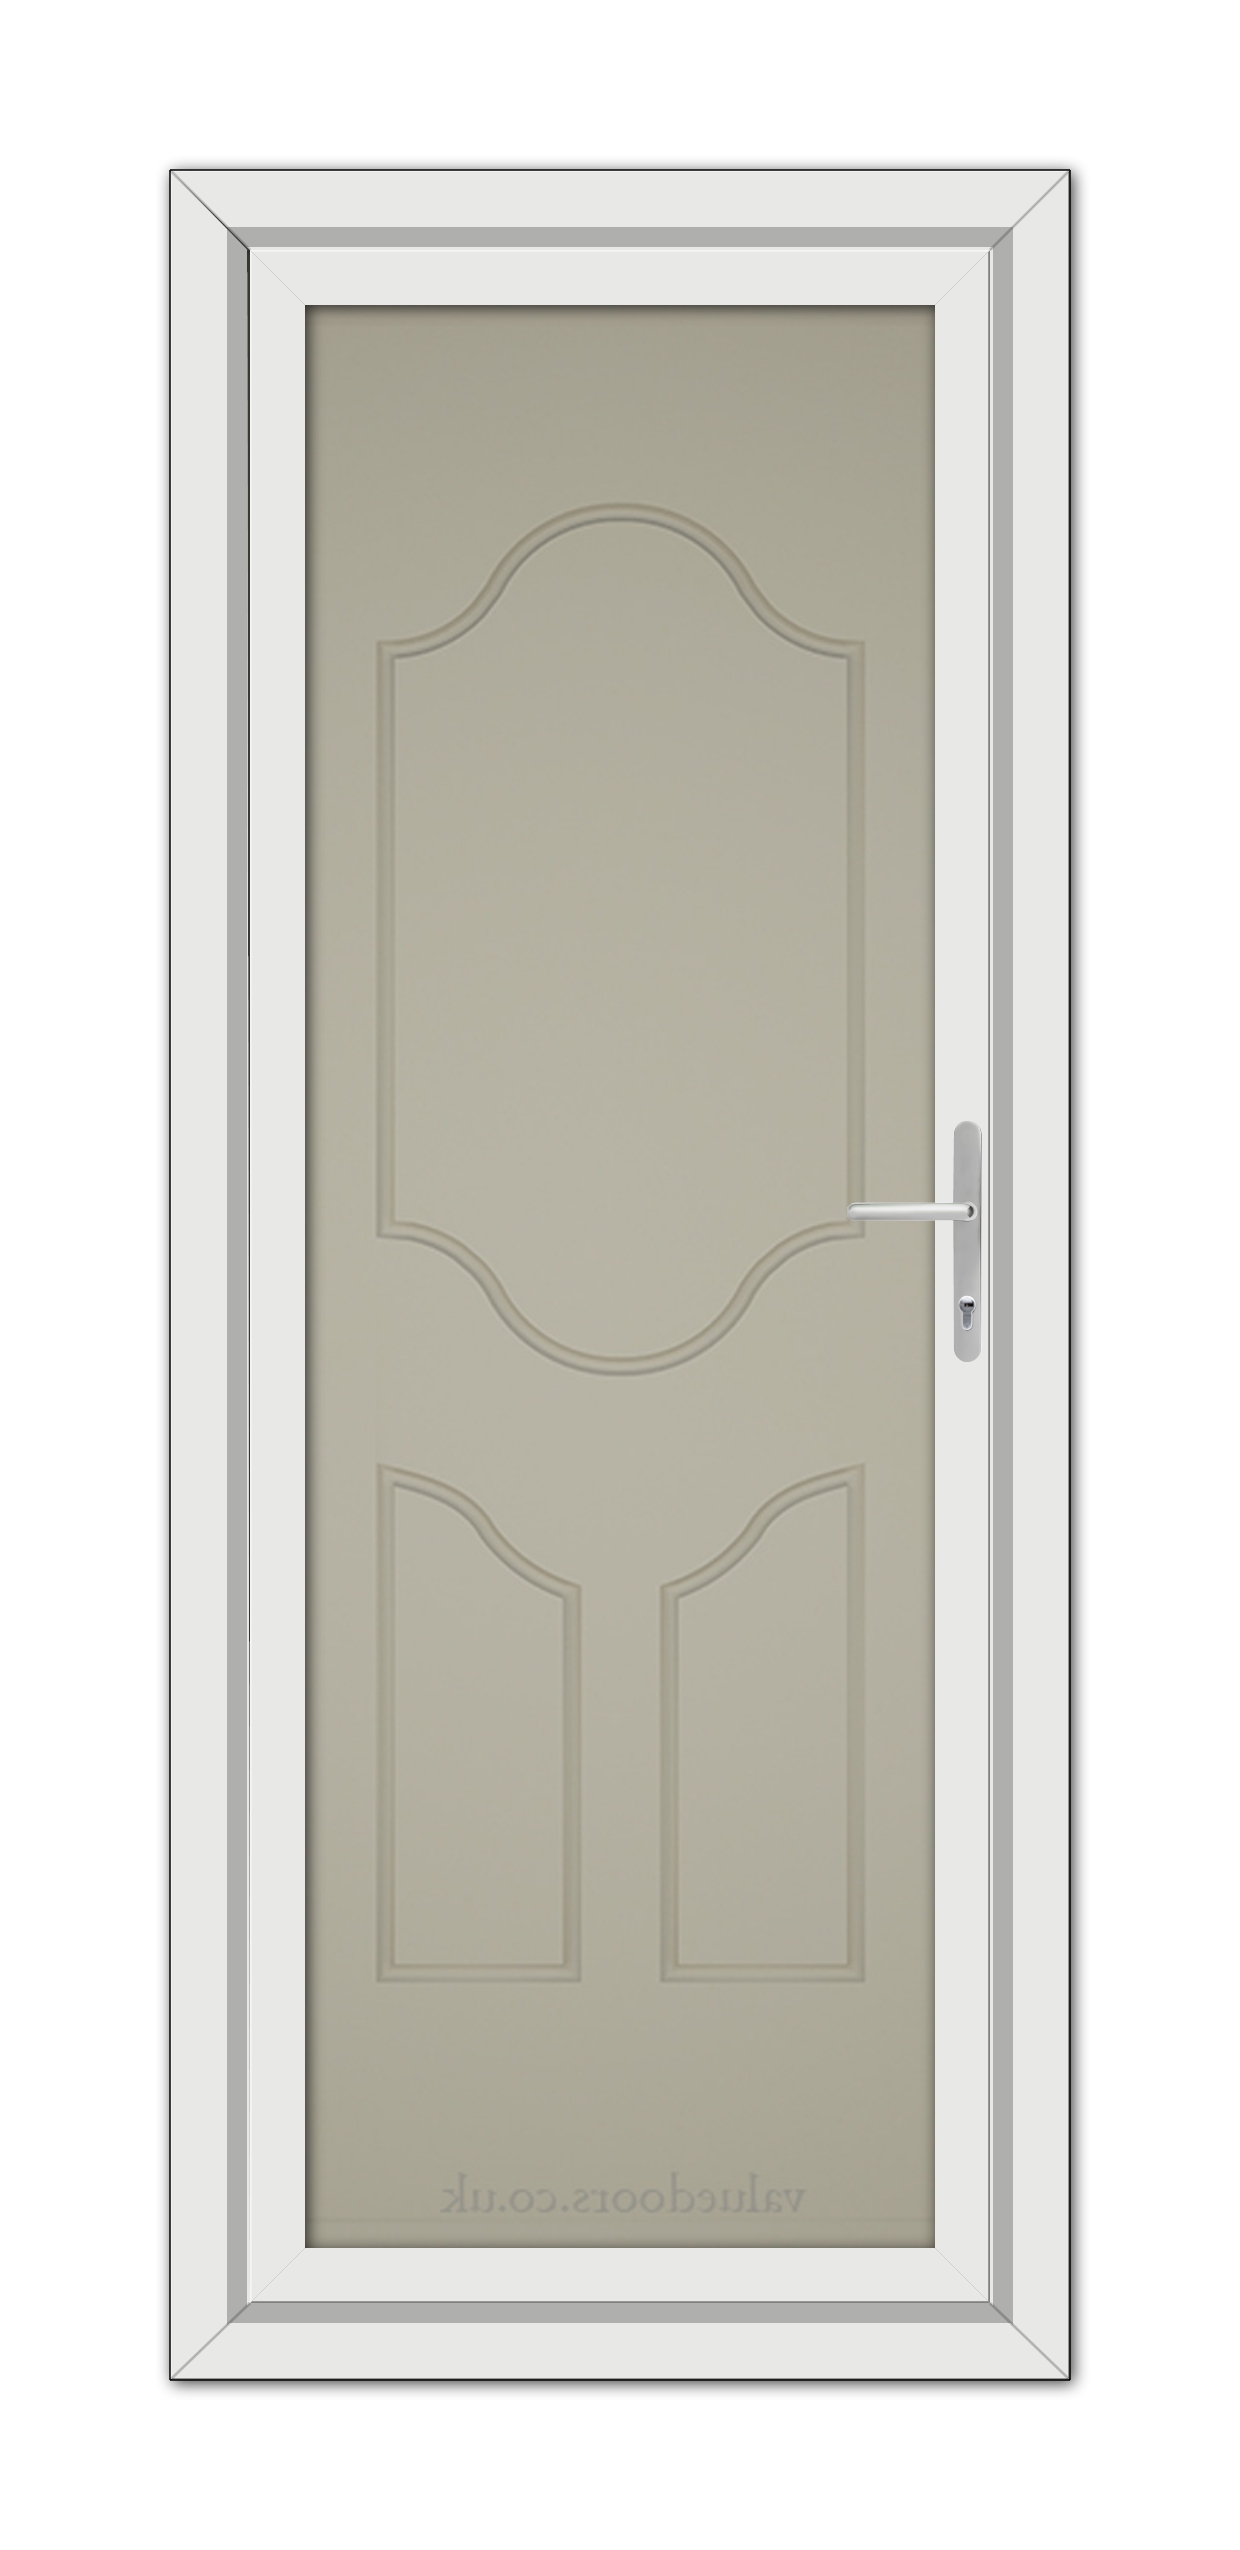 A closed Pebble Grey Althorpe Solid uPVC door with a white frame and a metal handle, viewed from a frontal angle.